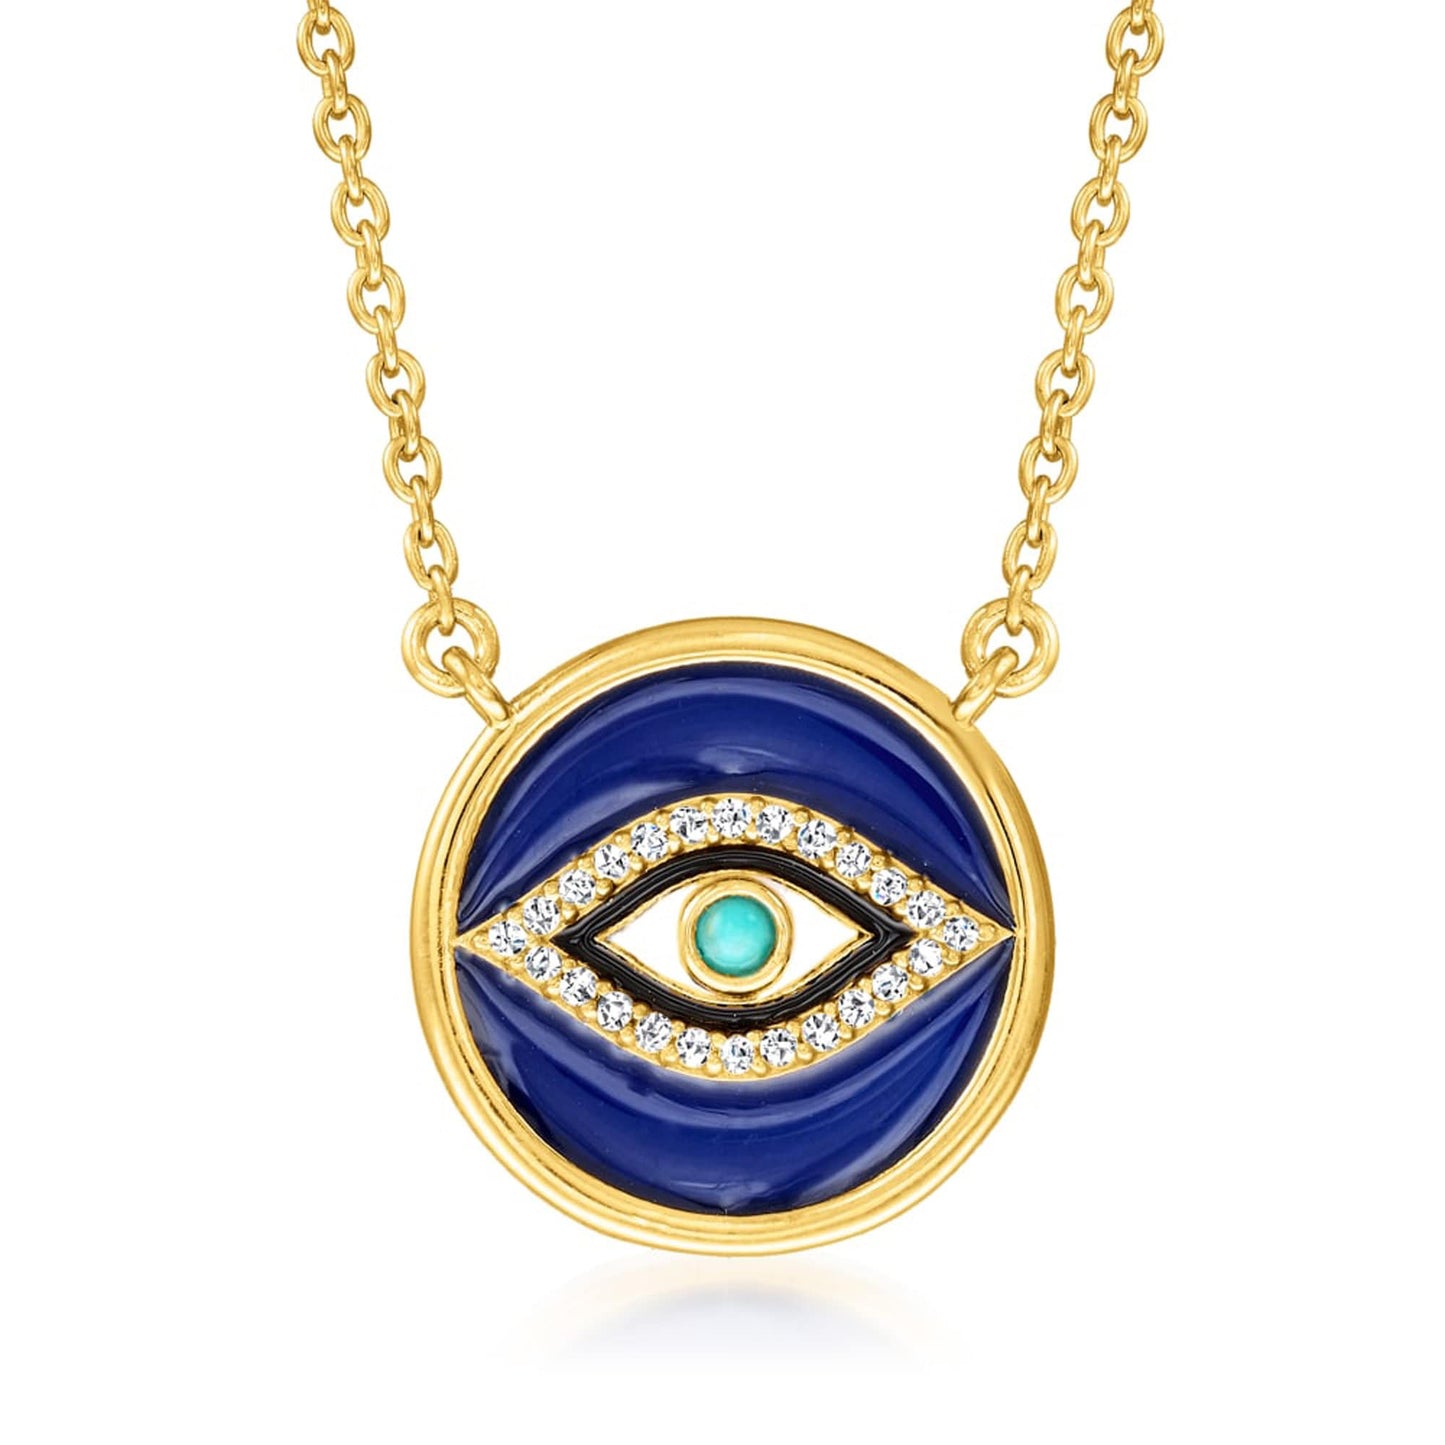 Evil Eye Sterling Silver, Campitos Turquoise White Topaz Pendant 18 Inches Chain